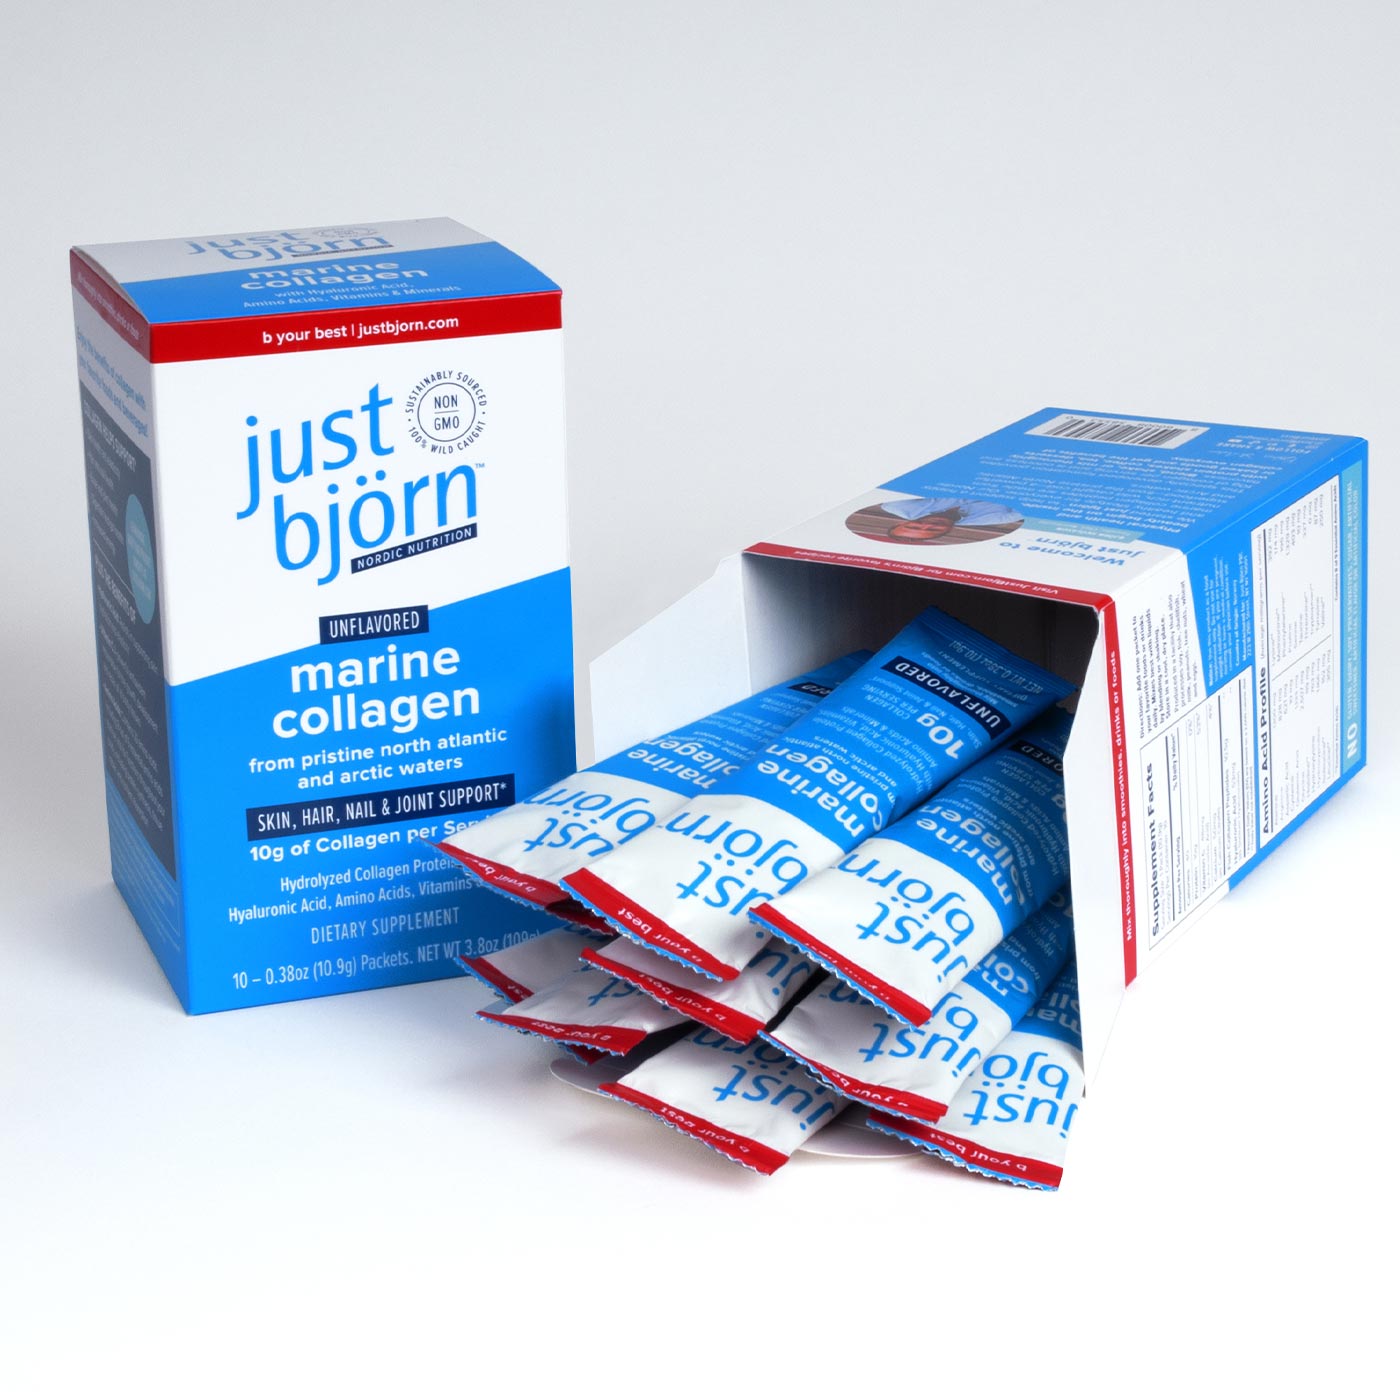 an opened and closed box of just björn stick packs 